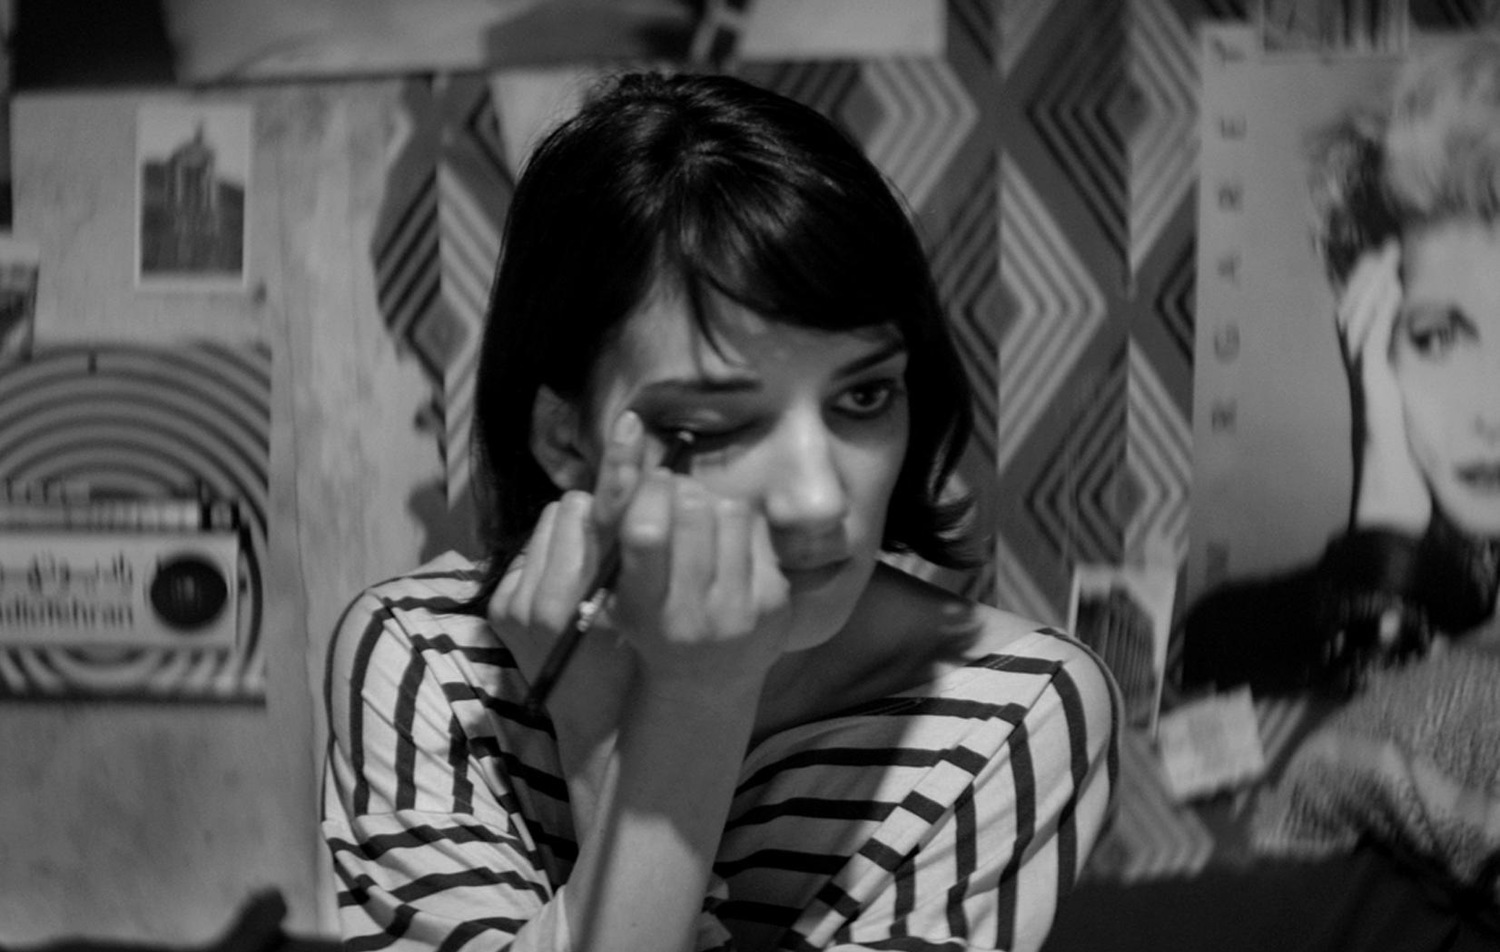 Issu du film d'Ana Lily Amirpoor "A girl walks home alone at night".